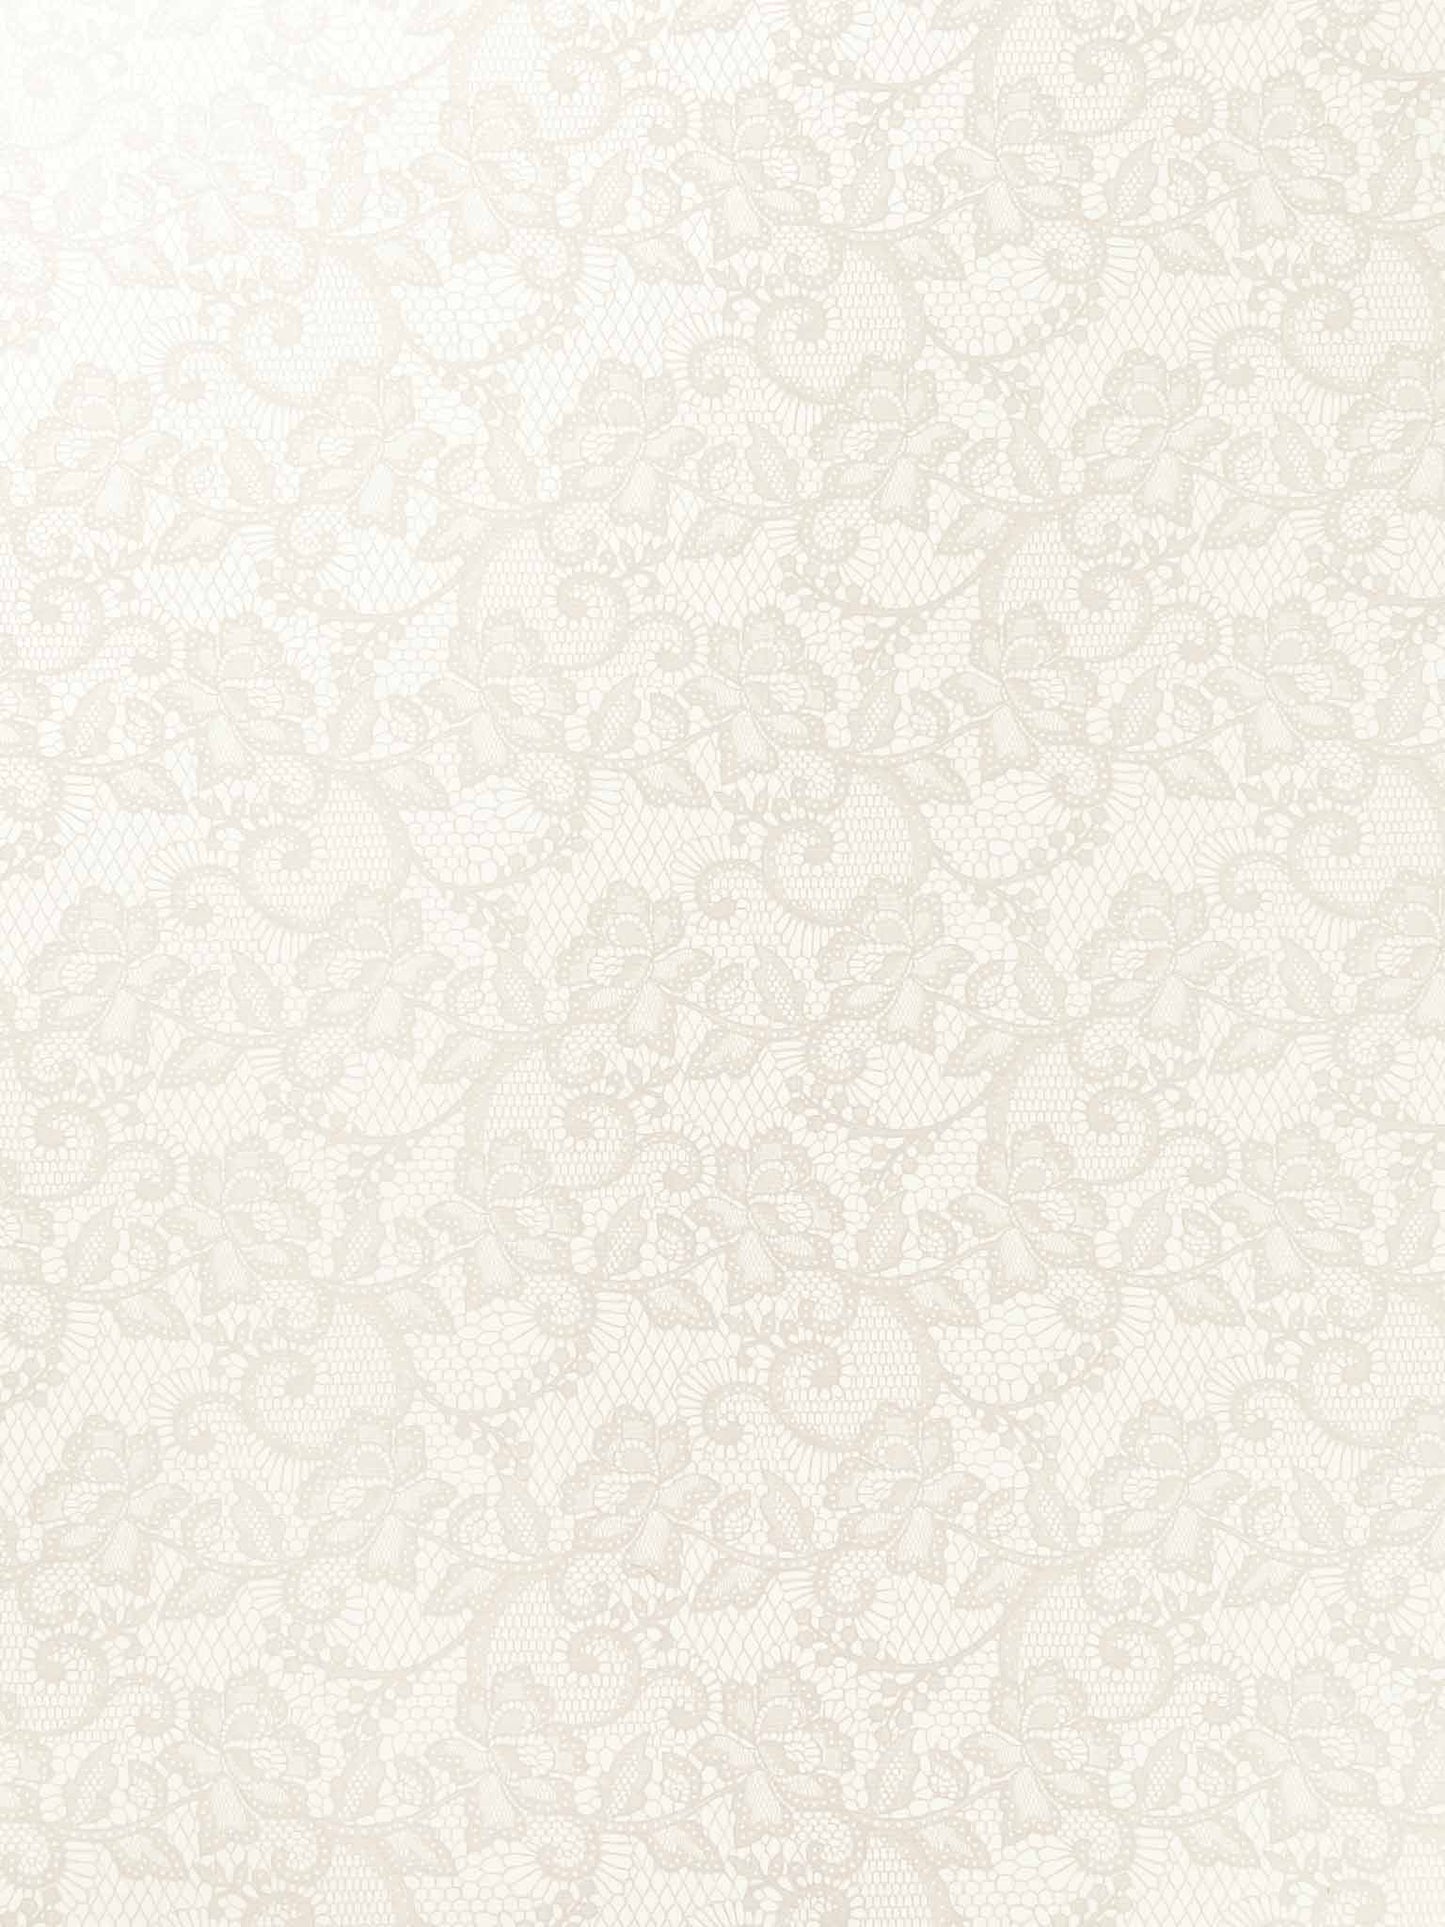 ivory-lace-patterned-a4-paper